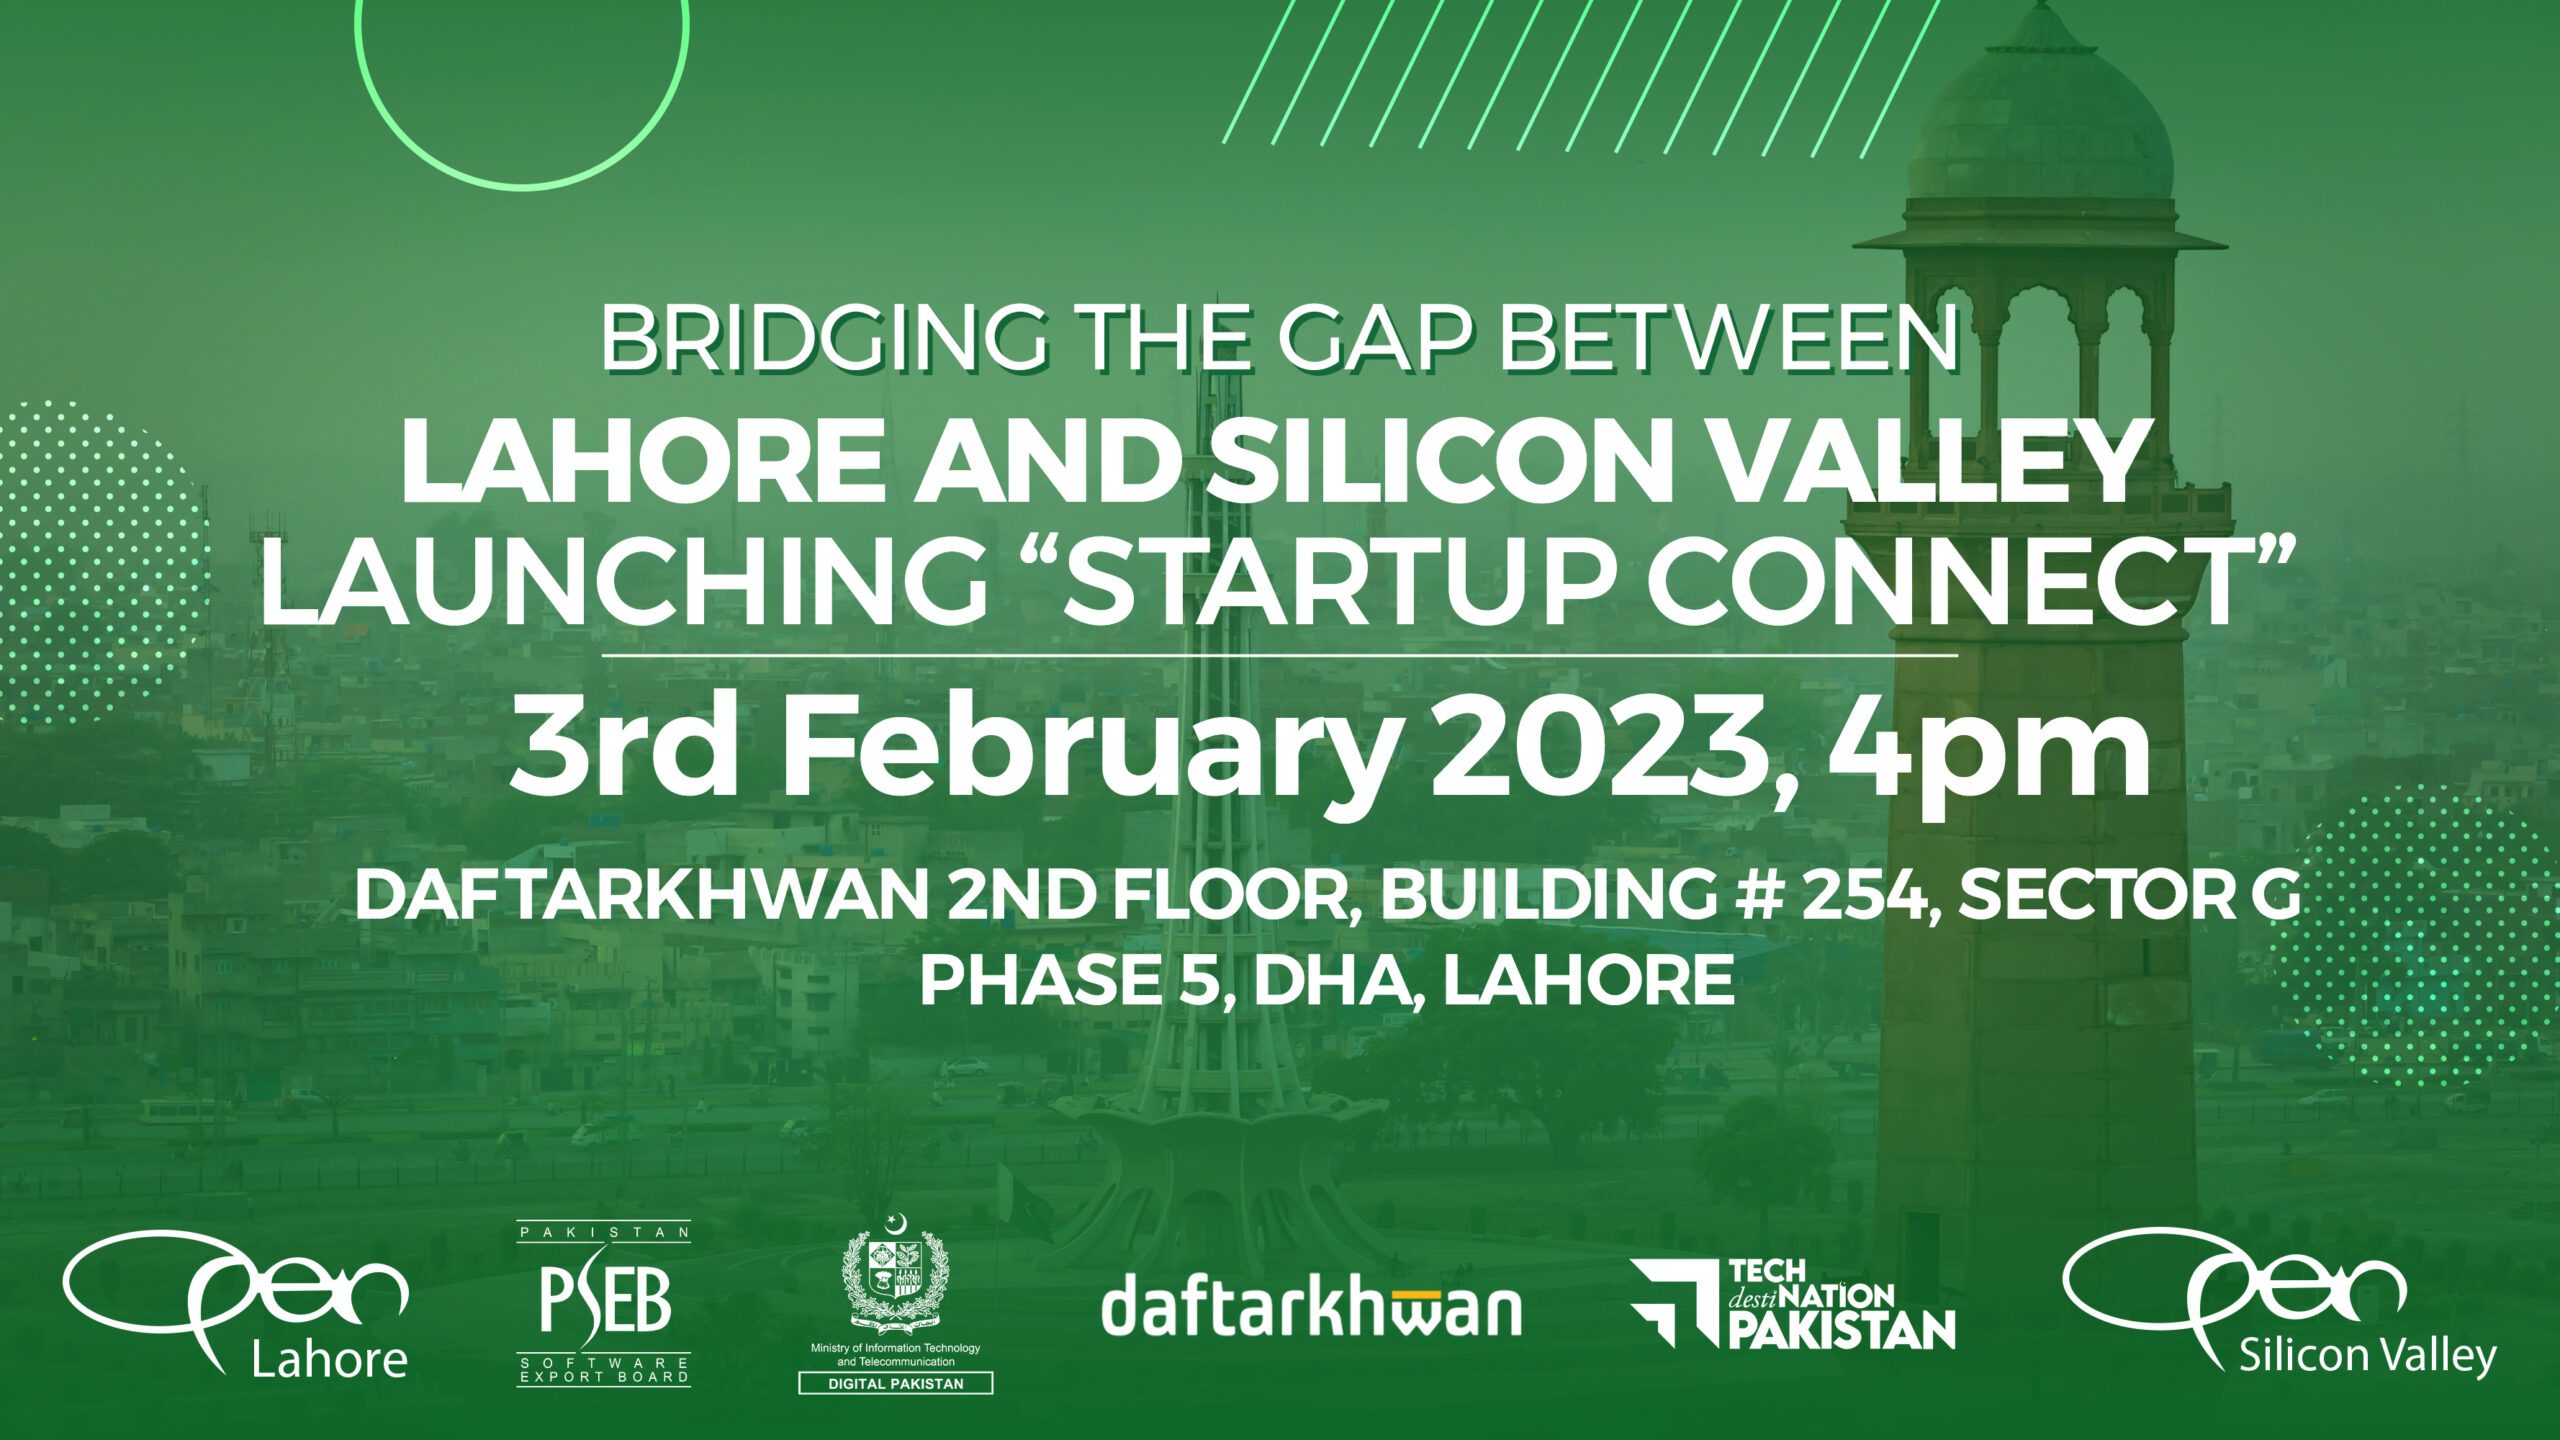 Bridging the gap between Lahore and silicon vallay Launching "Startup Connect